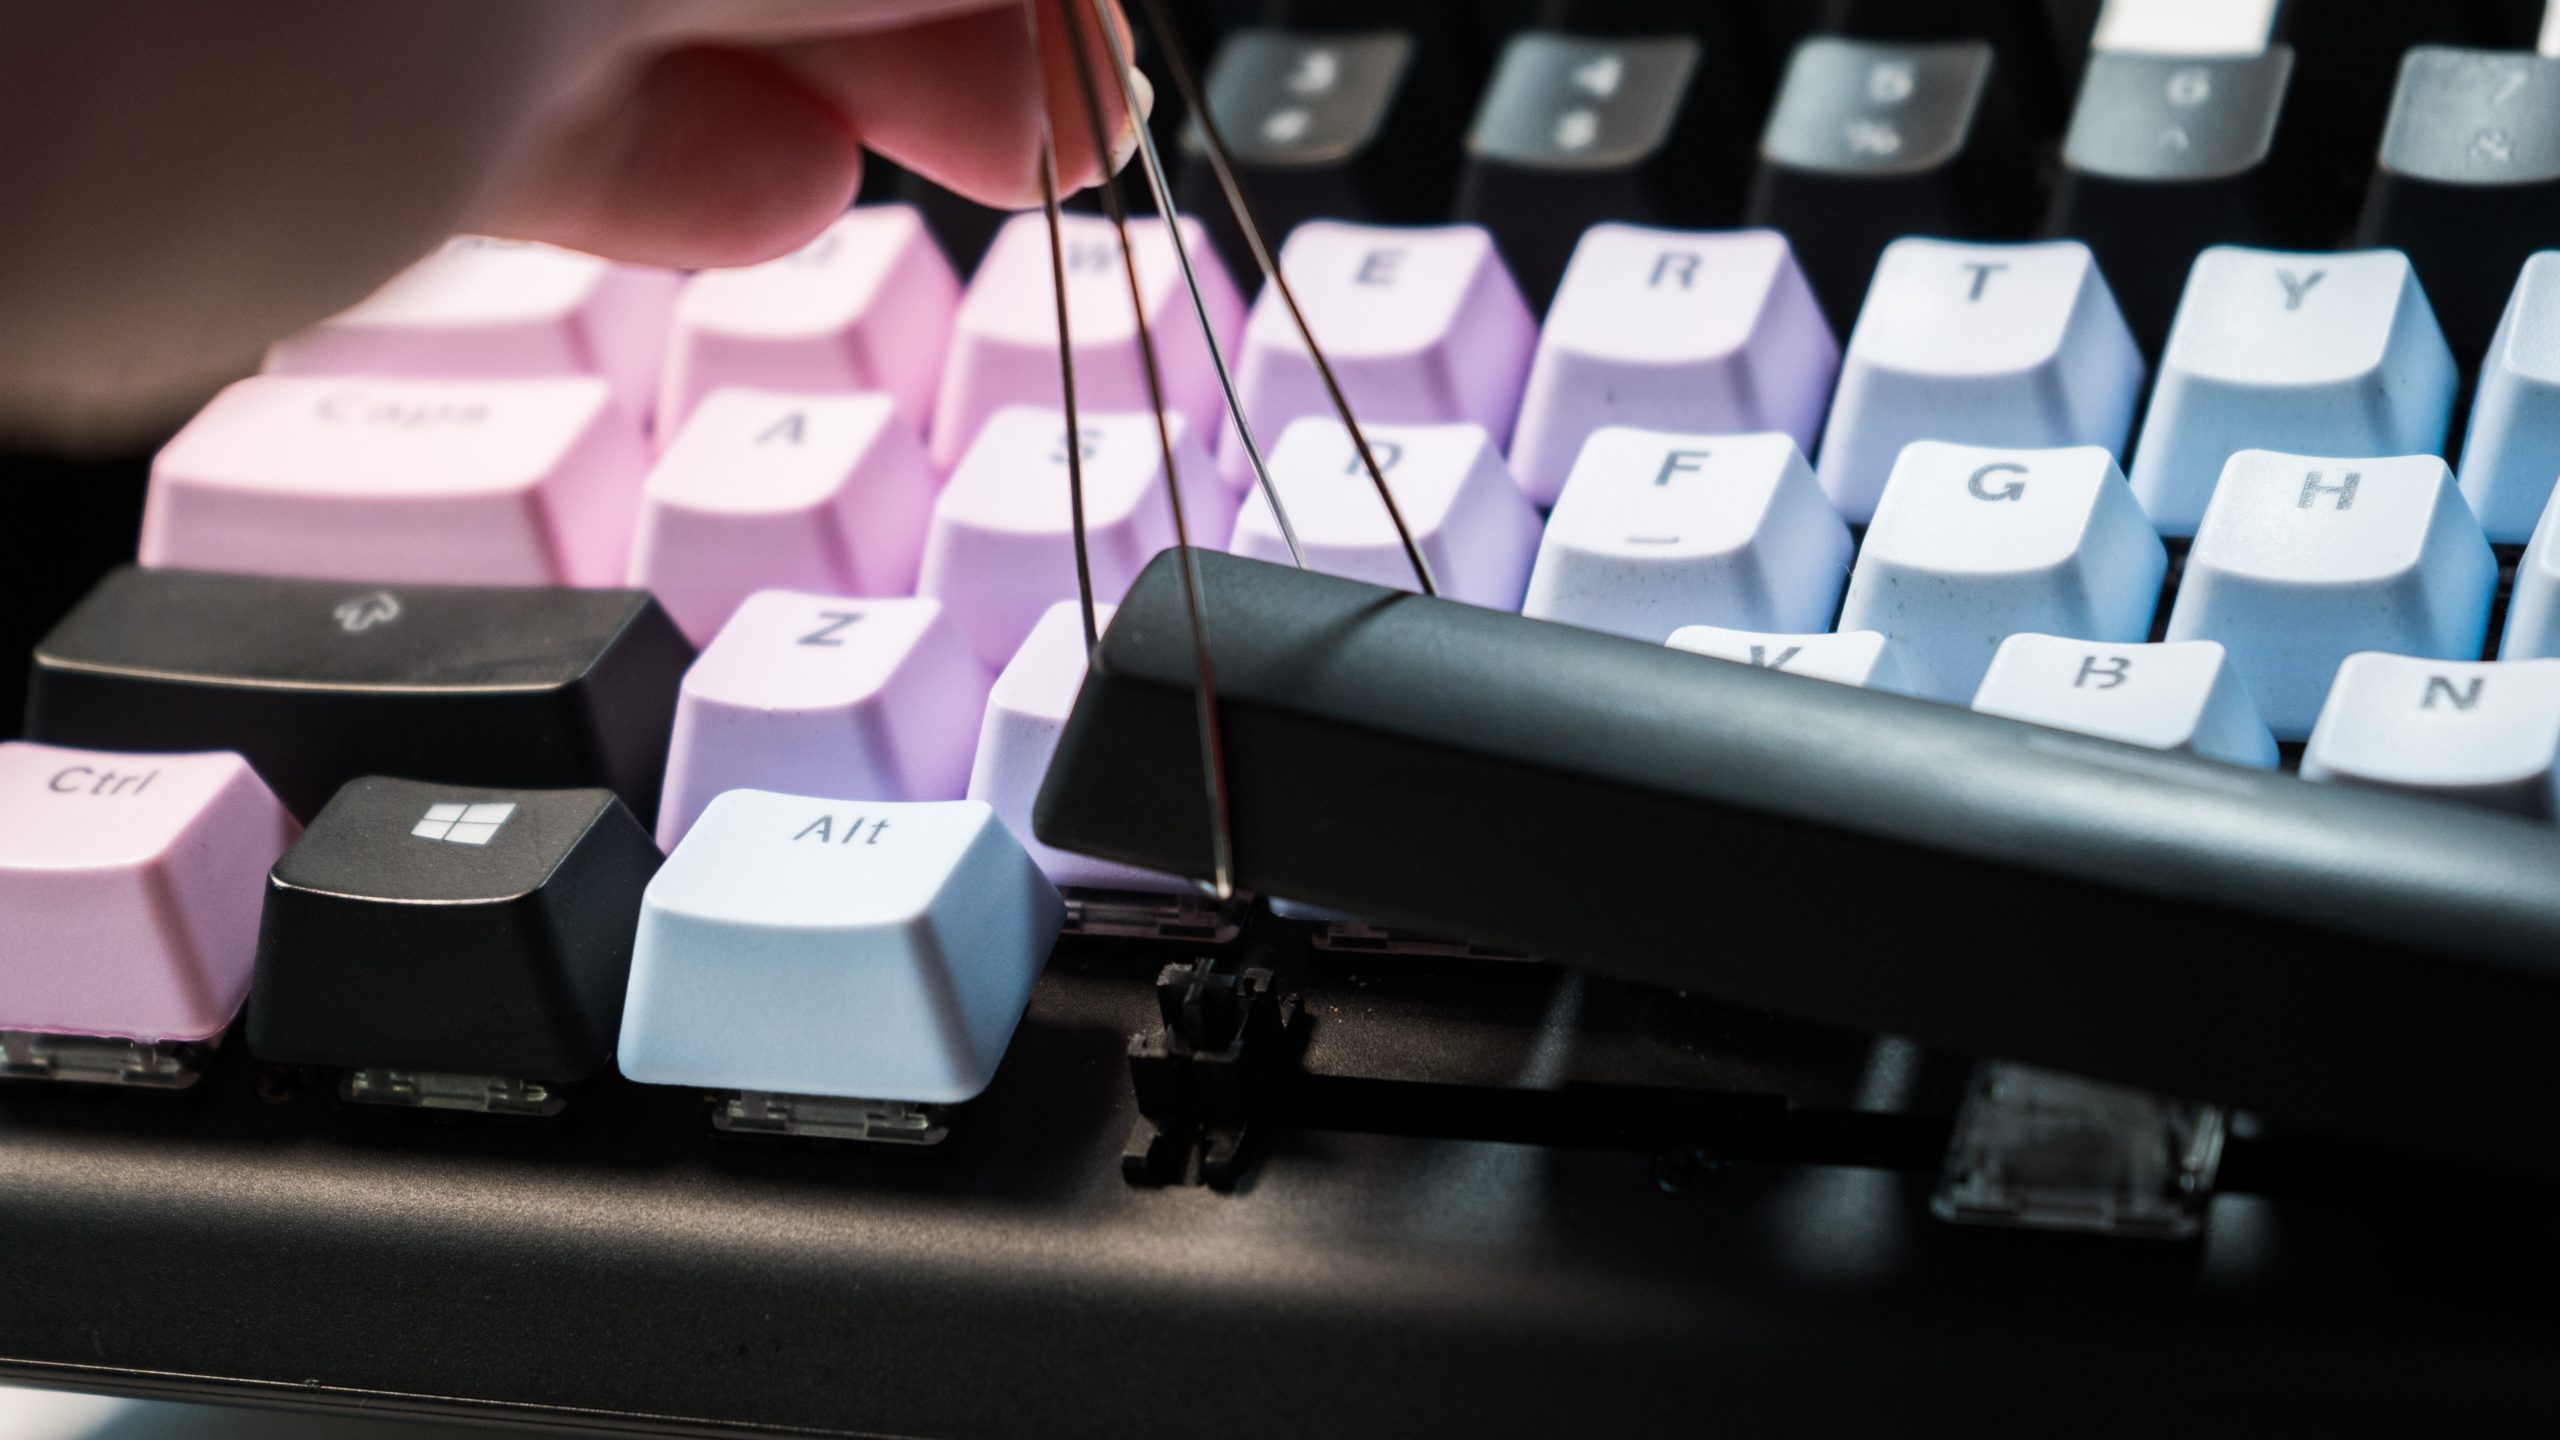 The spacebar will require the most effort to remove, but it also allows access to the most keycaps at once. (Photo: Florence Ion / Gizmodo)